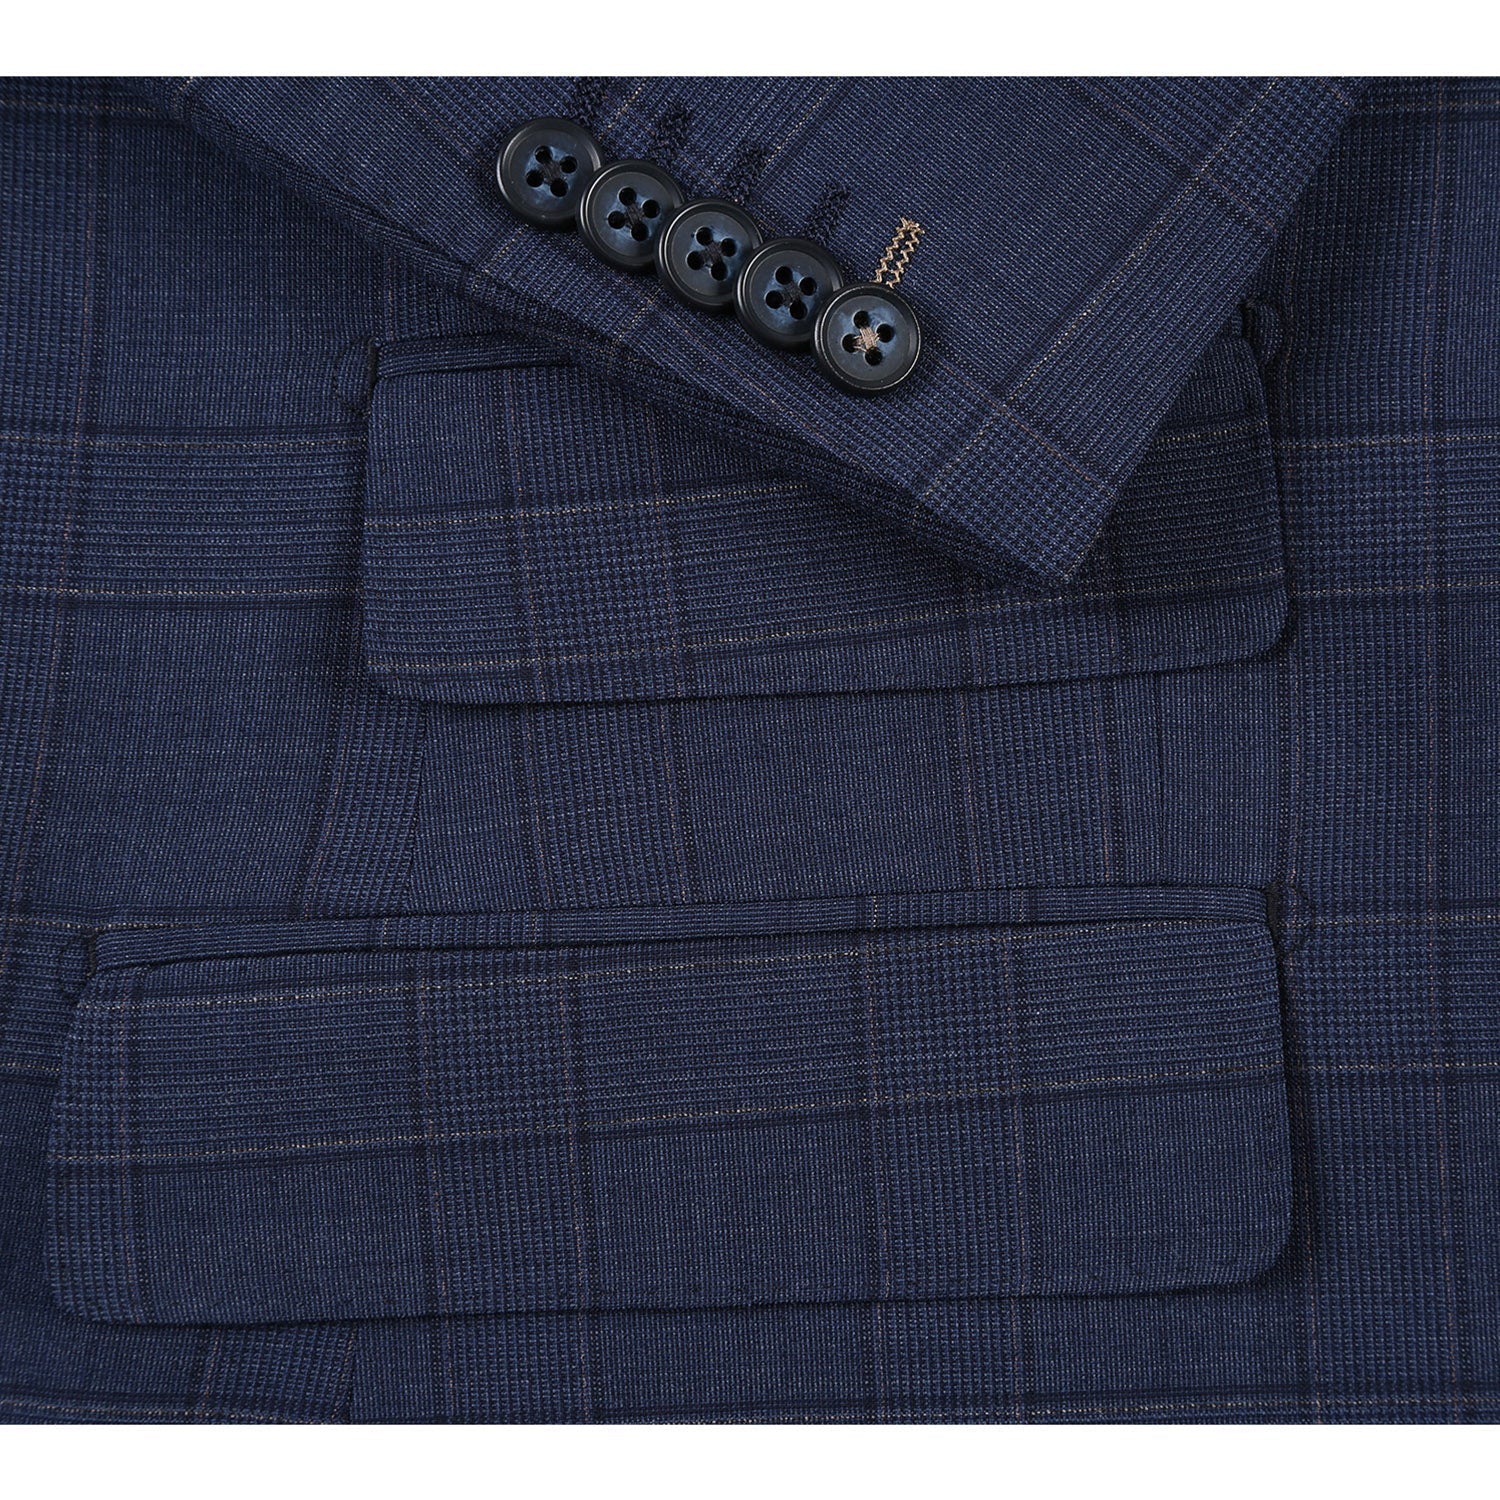 Wool Stretch Double Breasted SLIM FIT Suit in Prussian Blue Windowpane Check (Short, Regular, and Long Available) by English Laundry